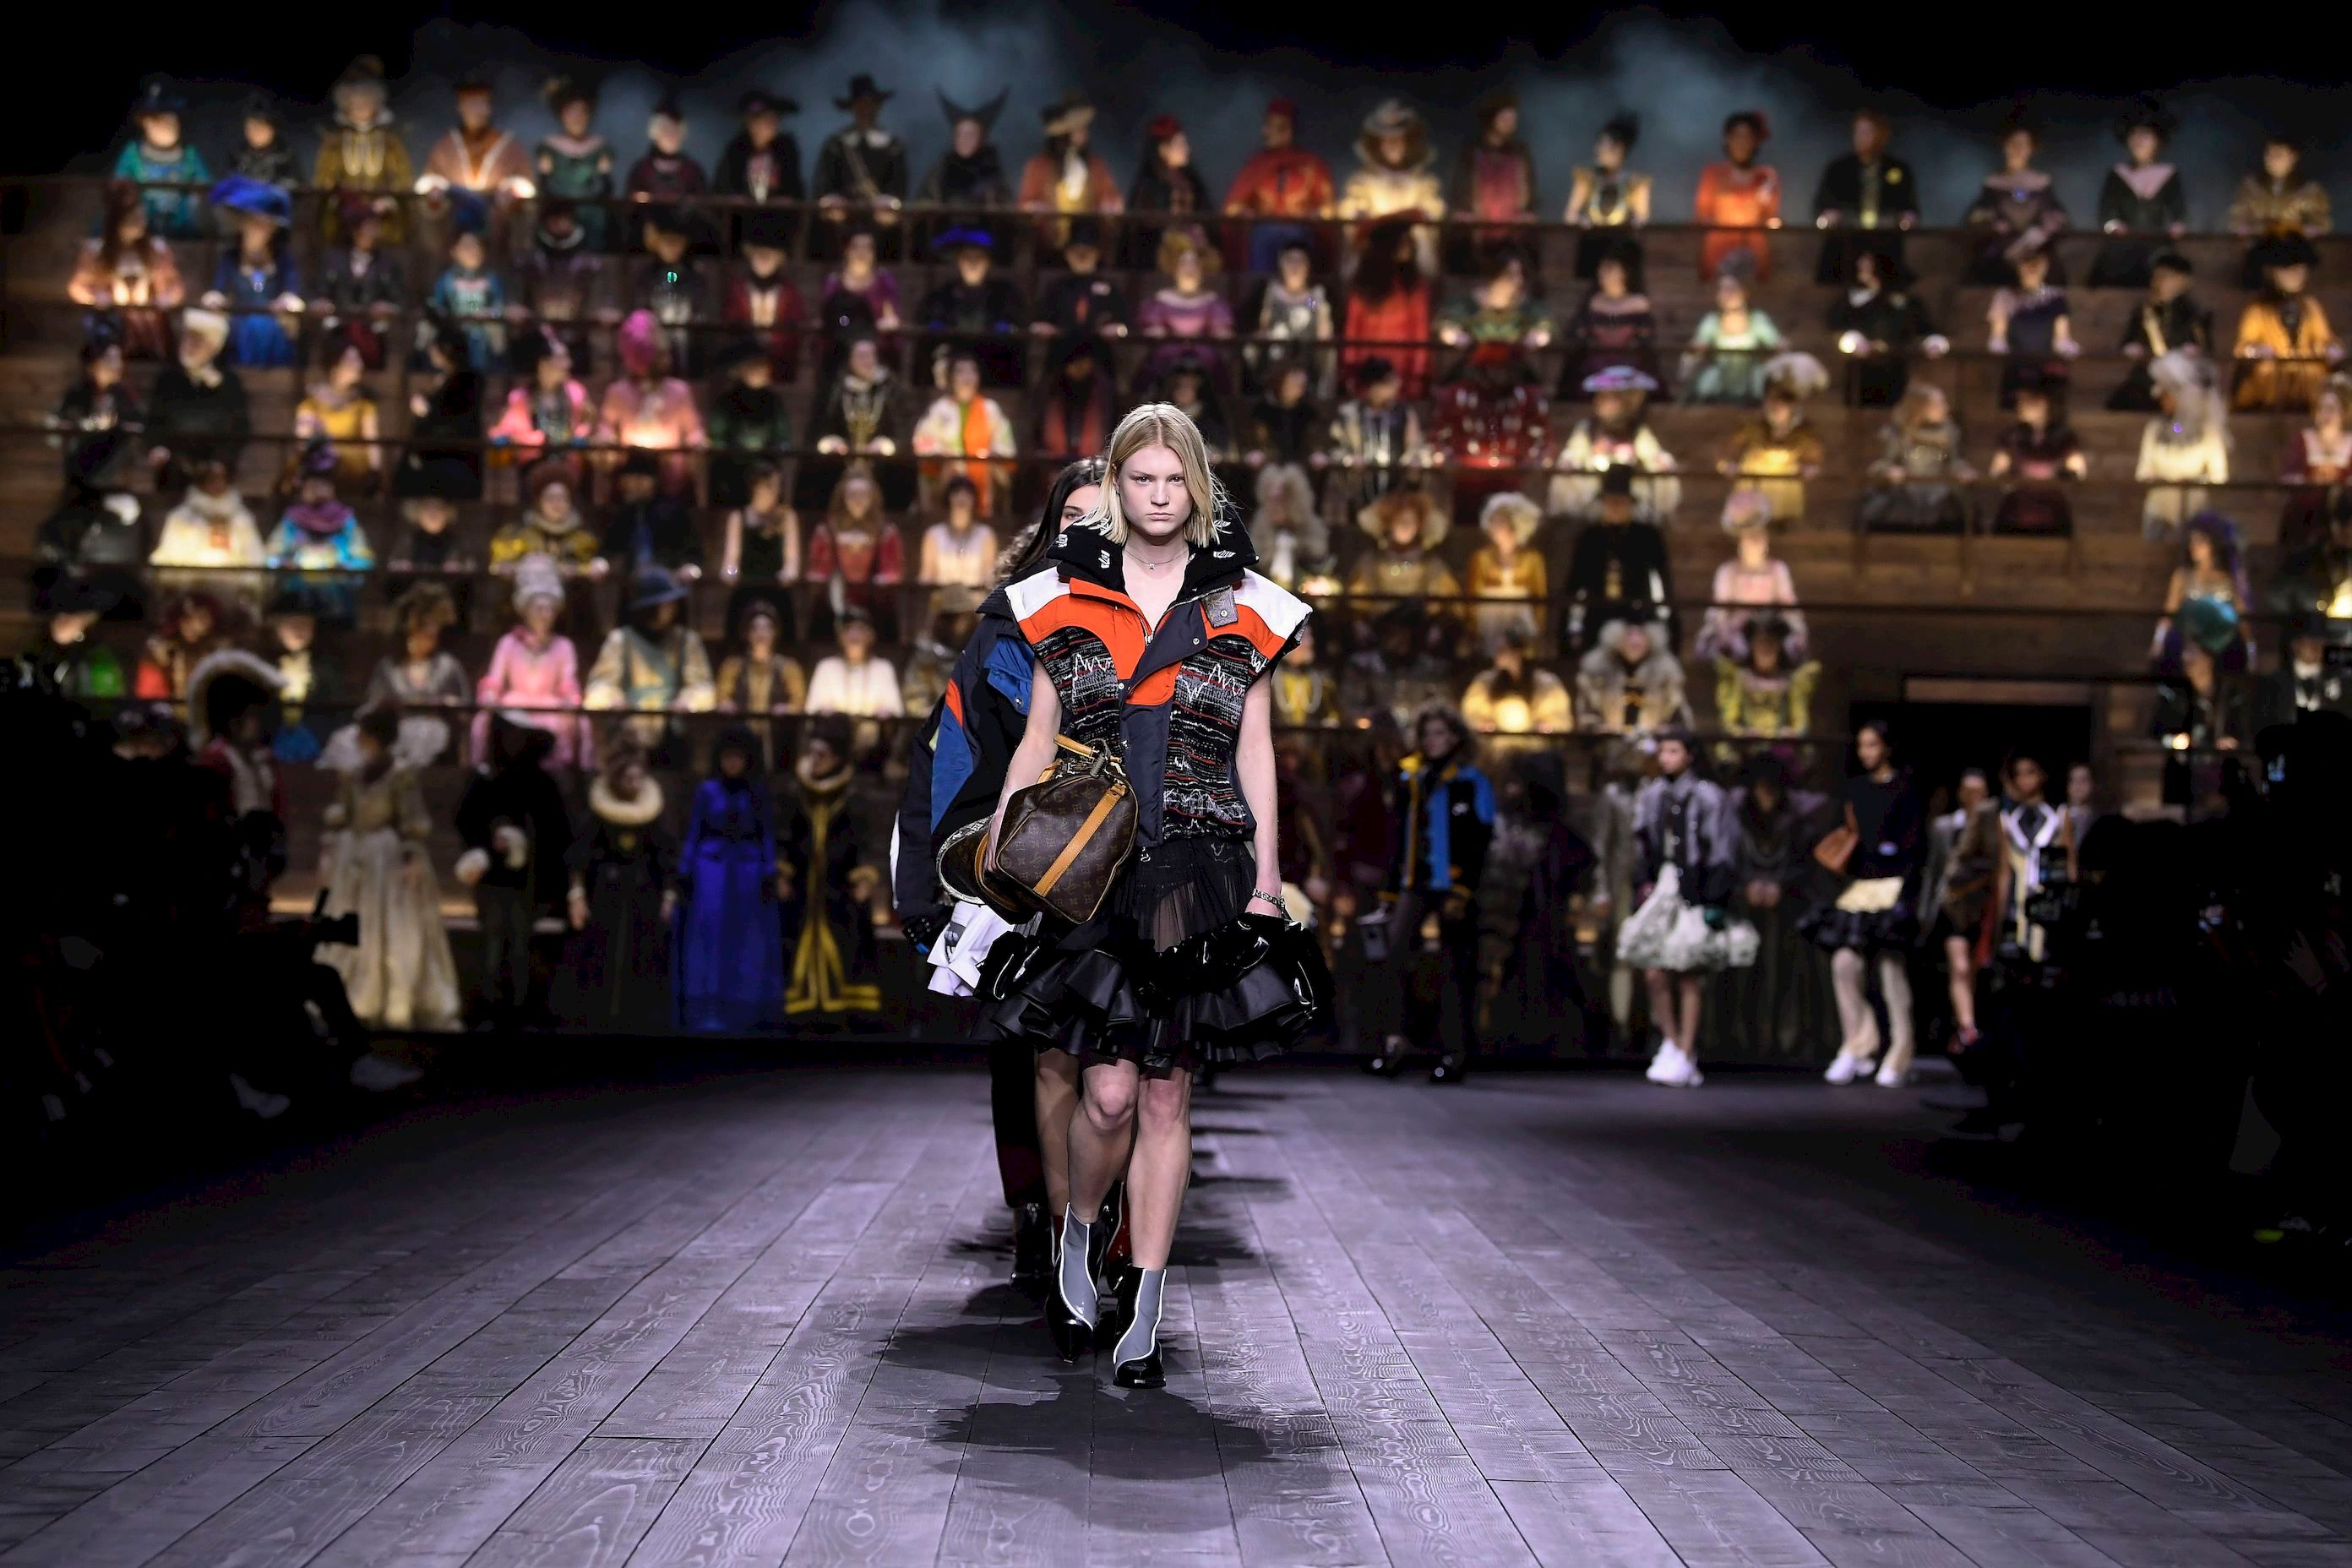 Louis Vuitton Takes Over The Lourve For Fall Winter '21